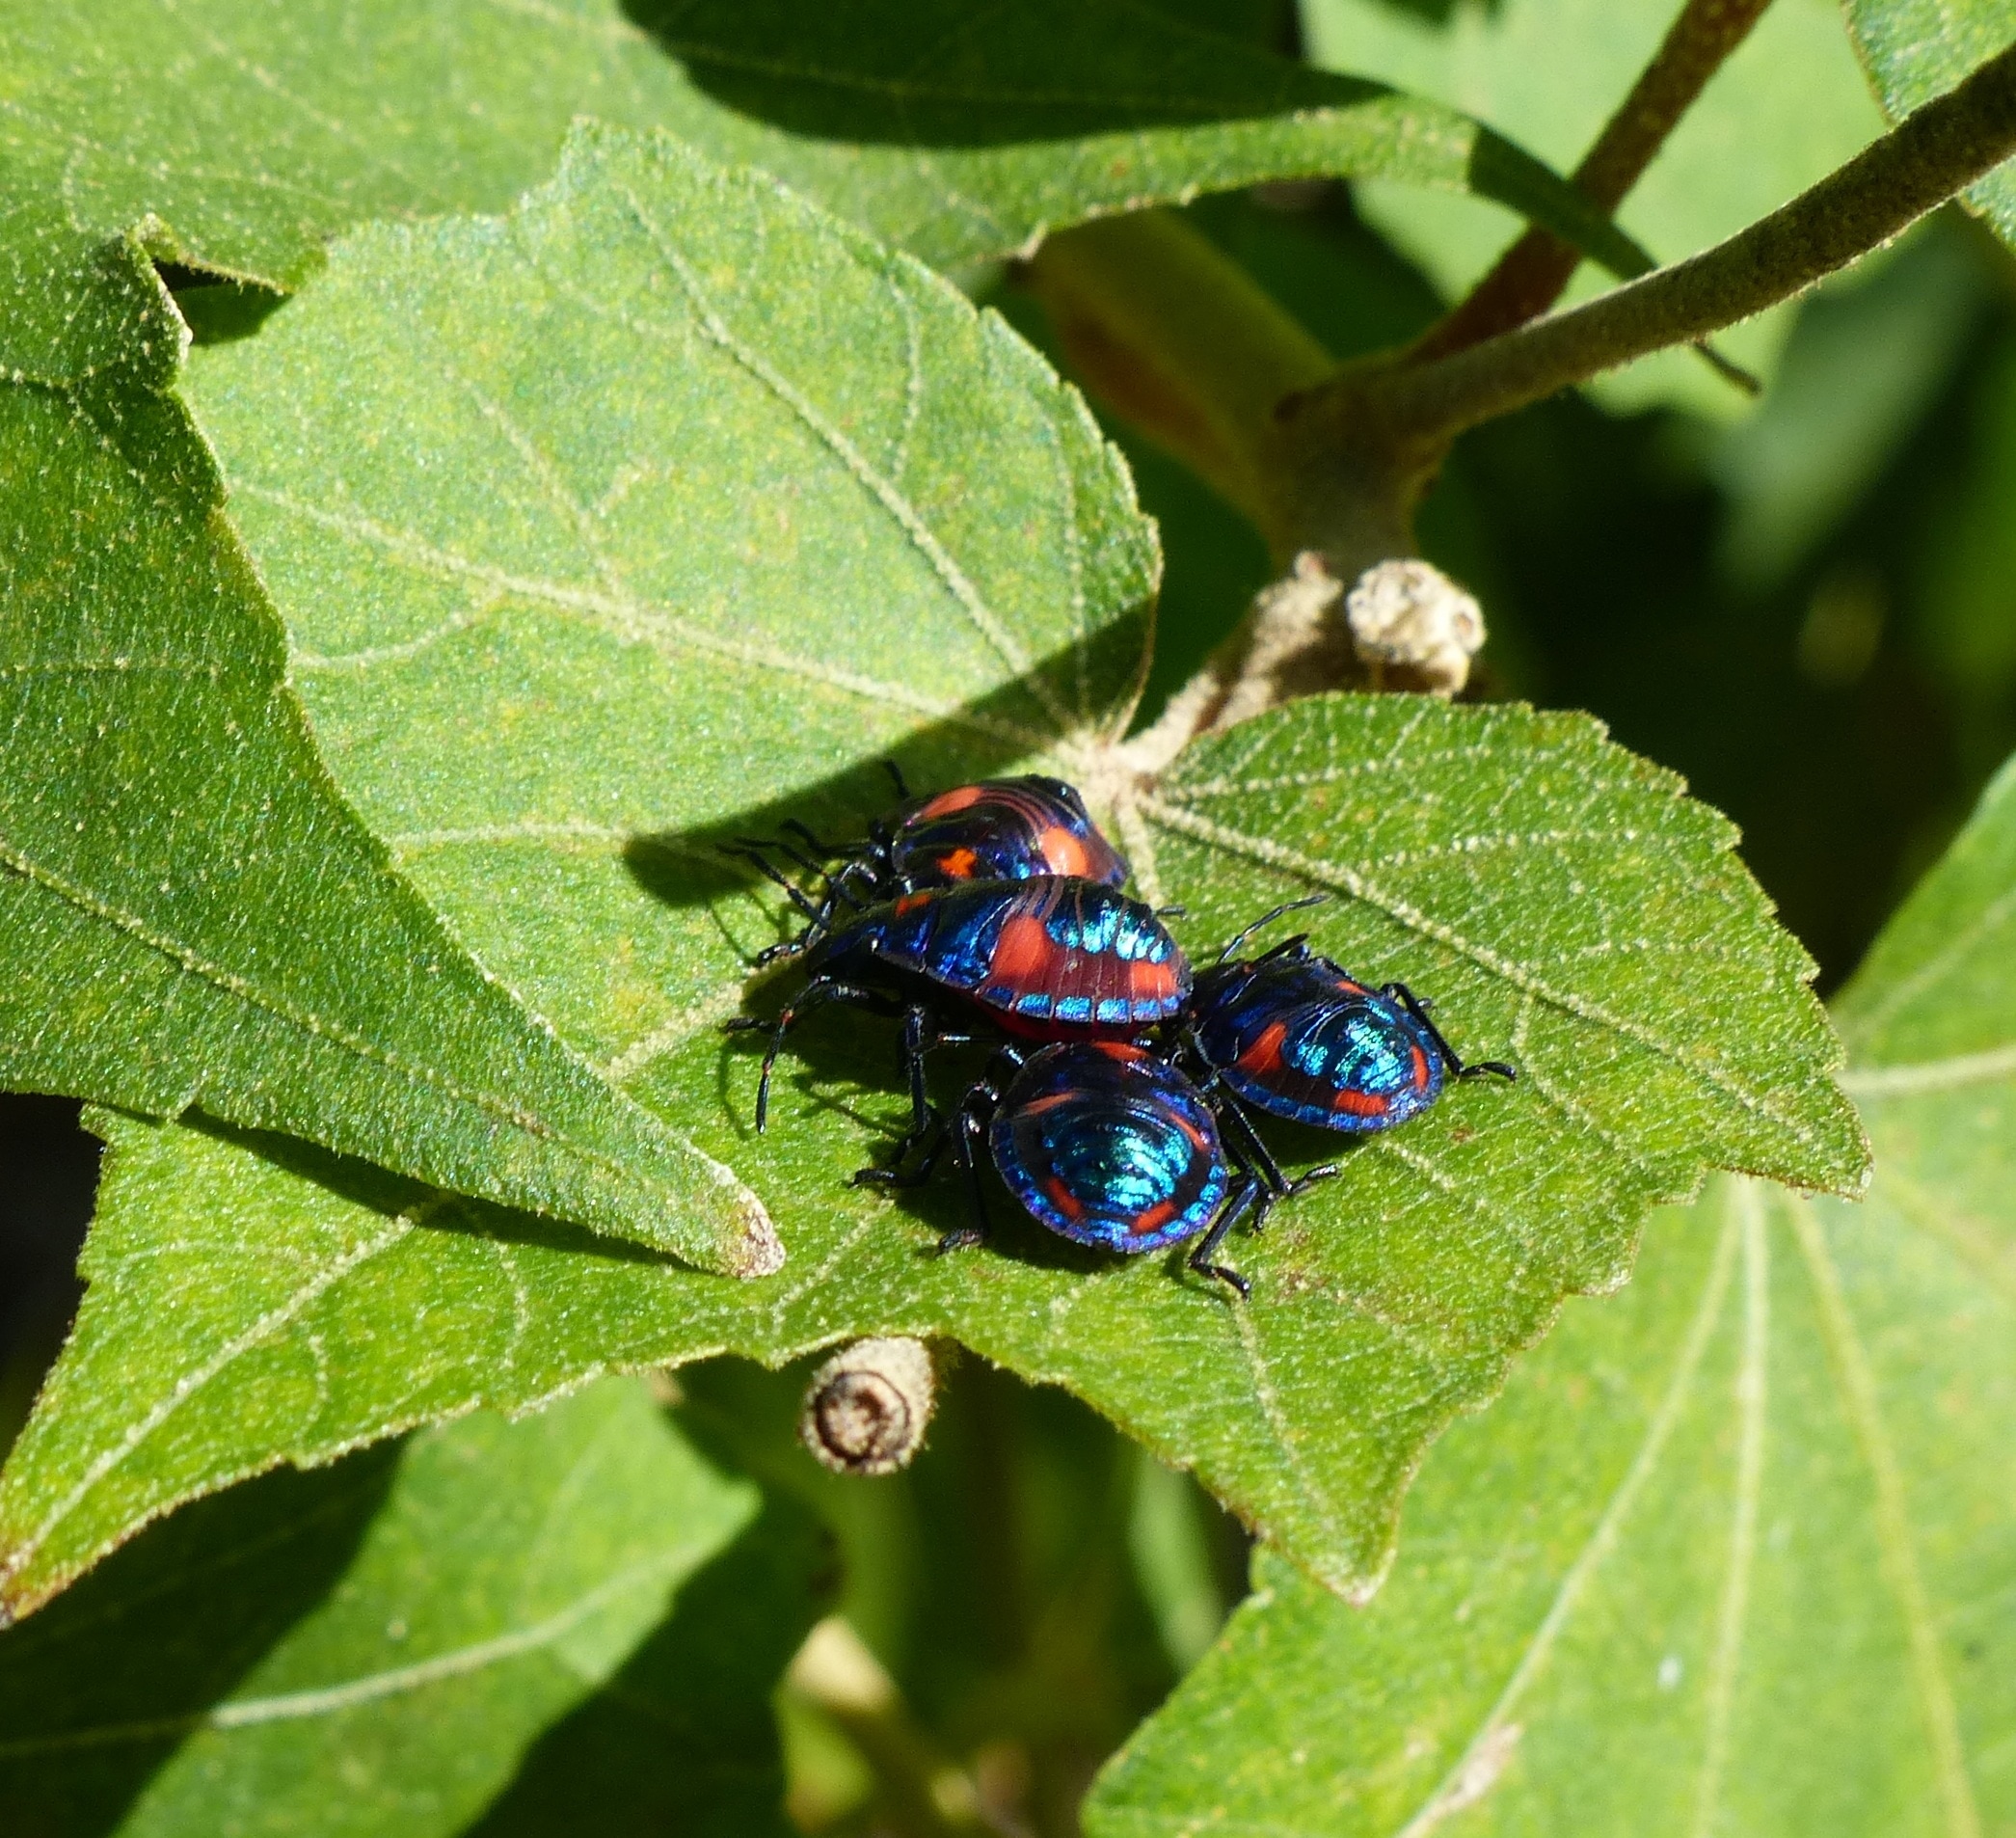 4 blue orange and black insects